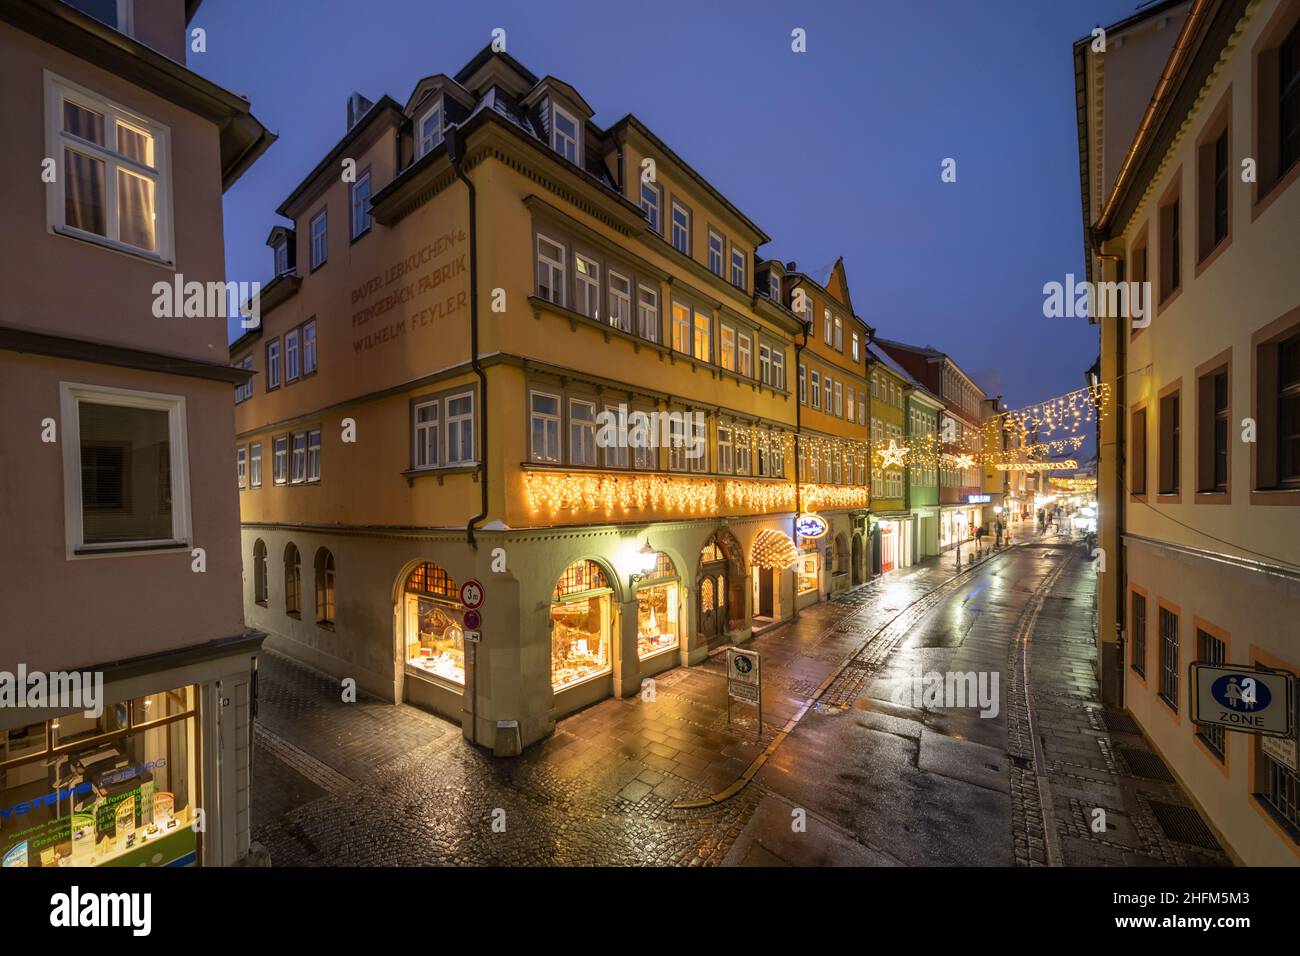 Imperial Pastry Shop Feyler in Coburg, Germany, at Dusk Stock Photo